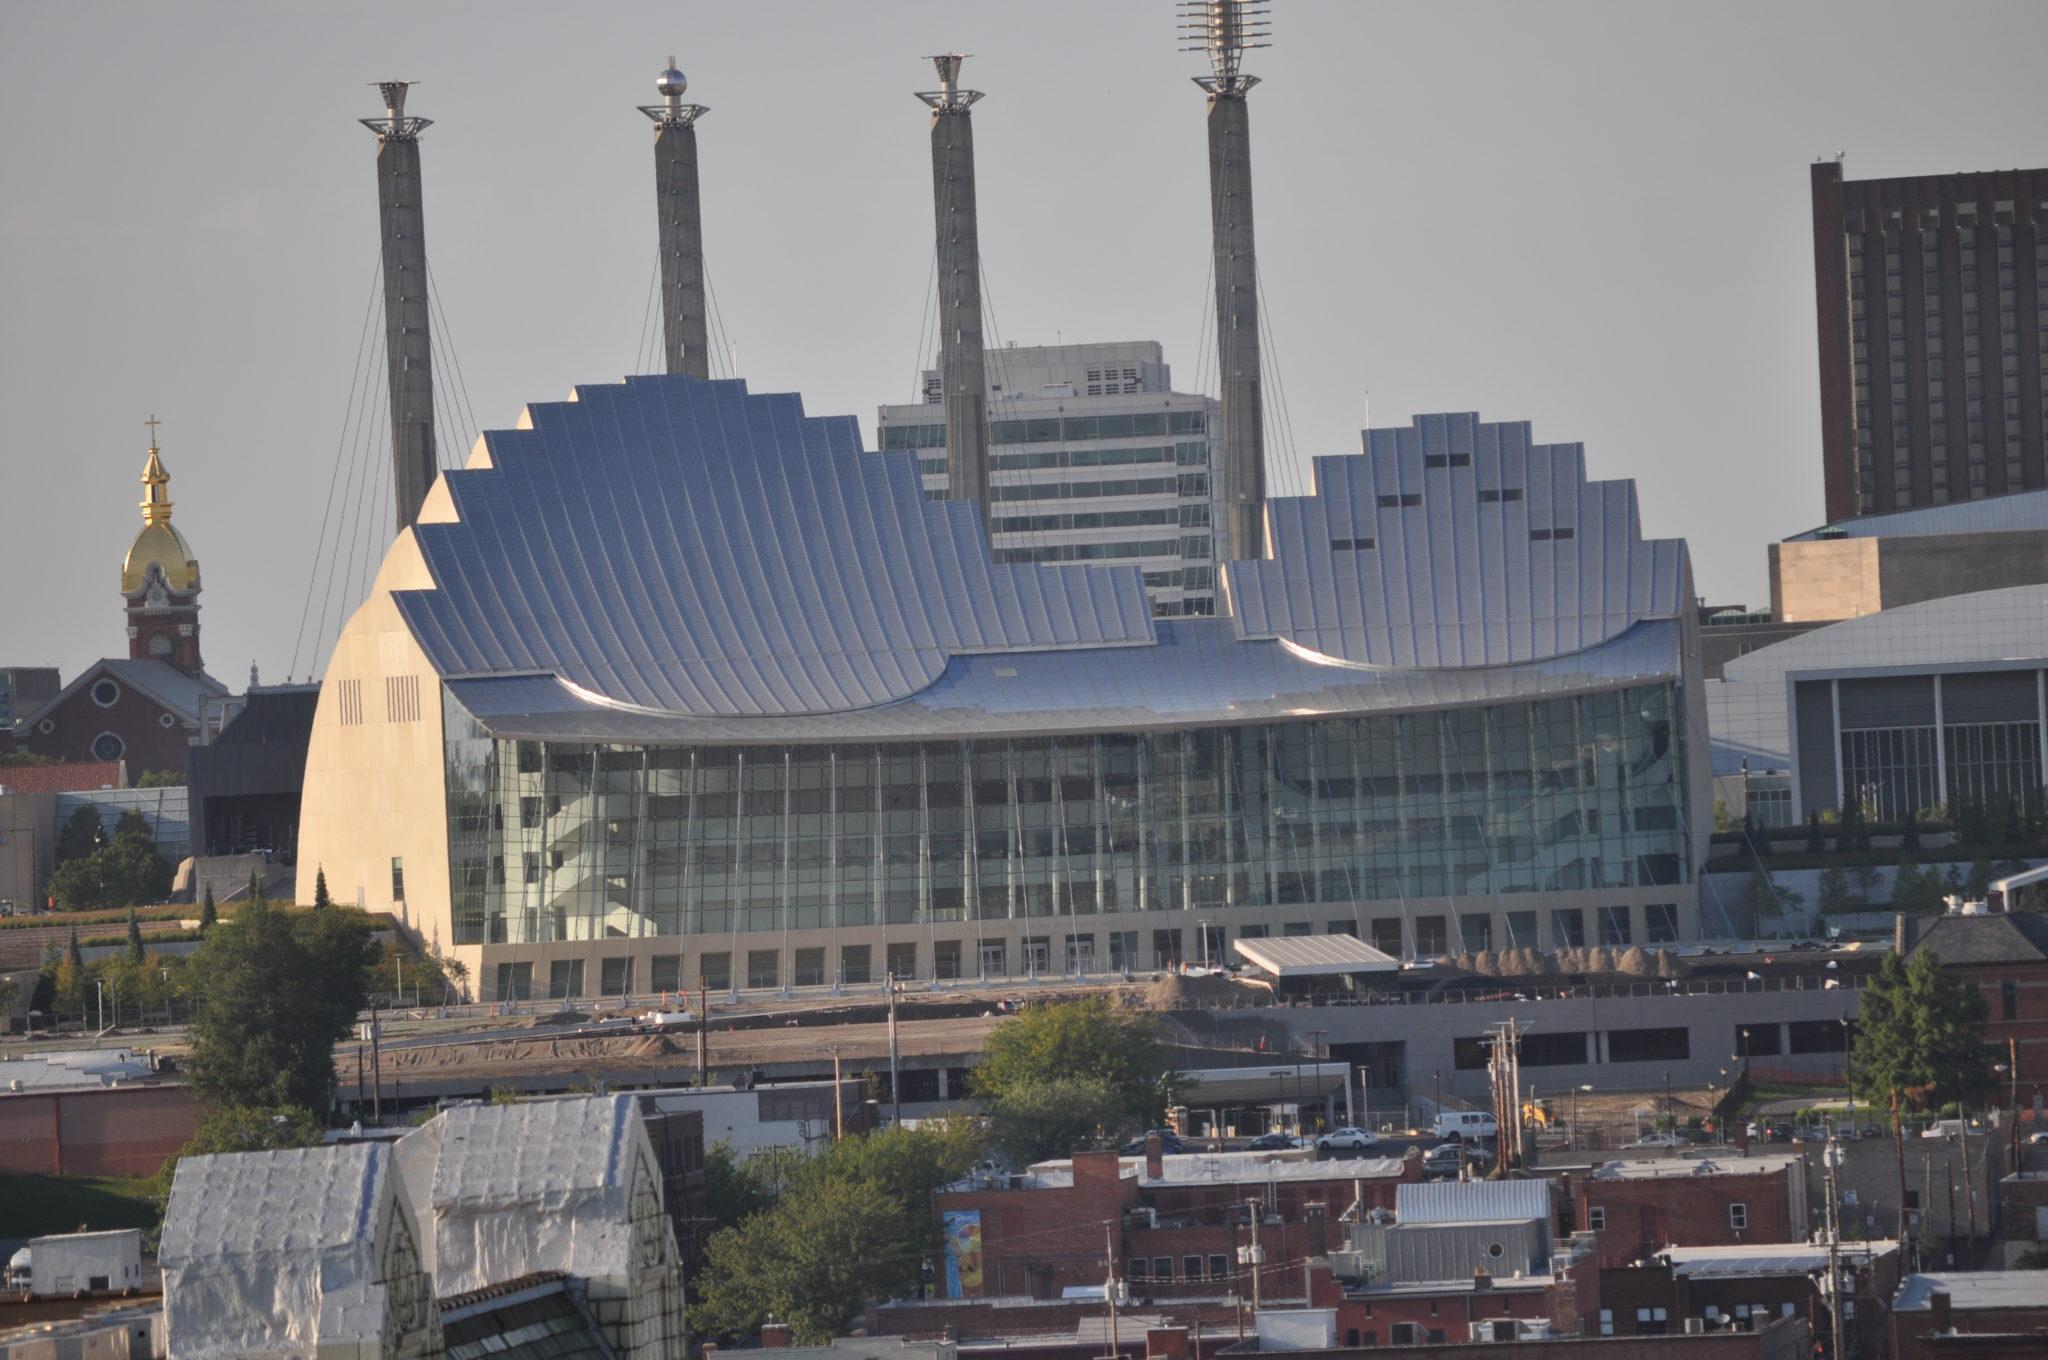 The Kauffman Center for the Performing Arts located at 1601 Broadway in Downtown Kansas City.